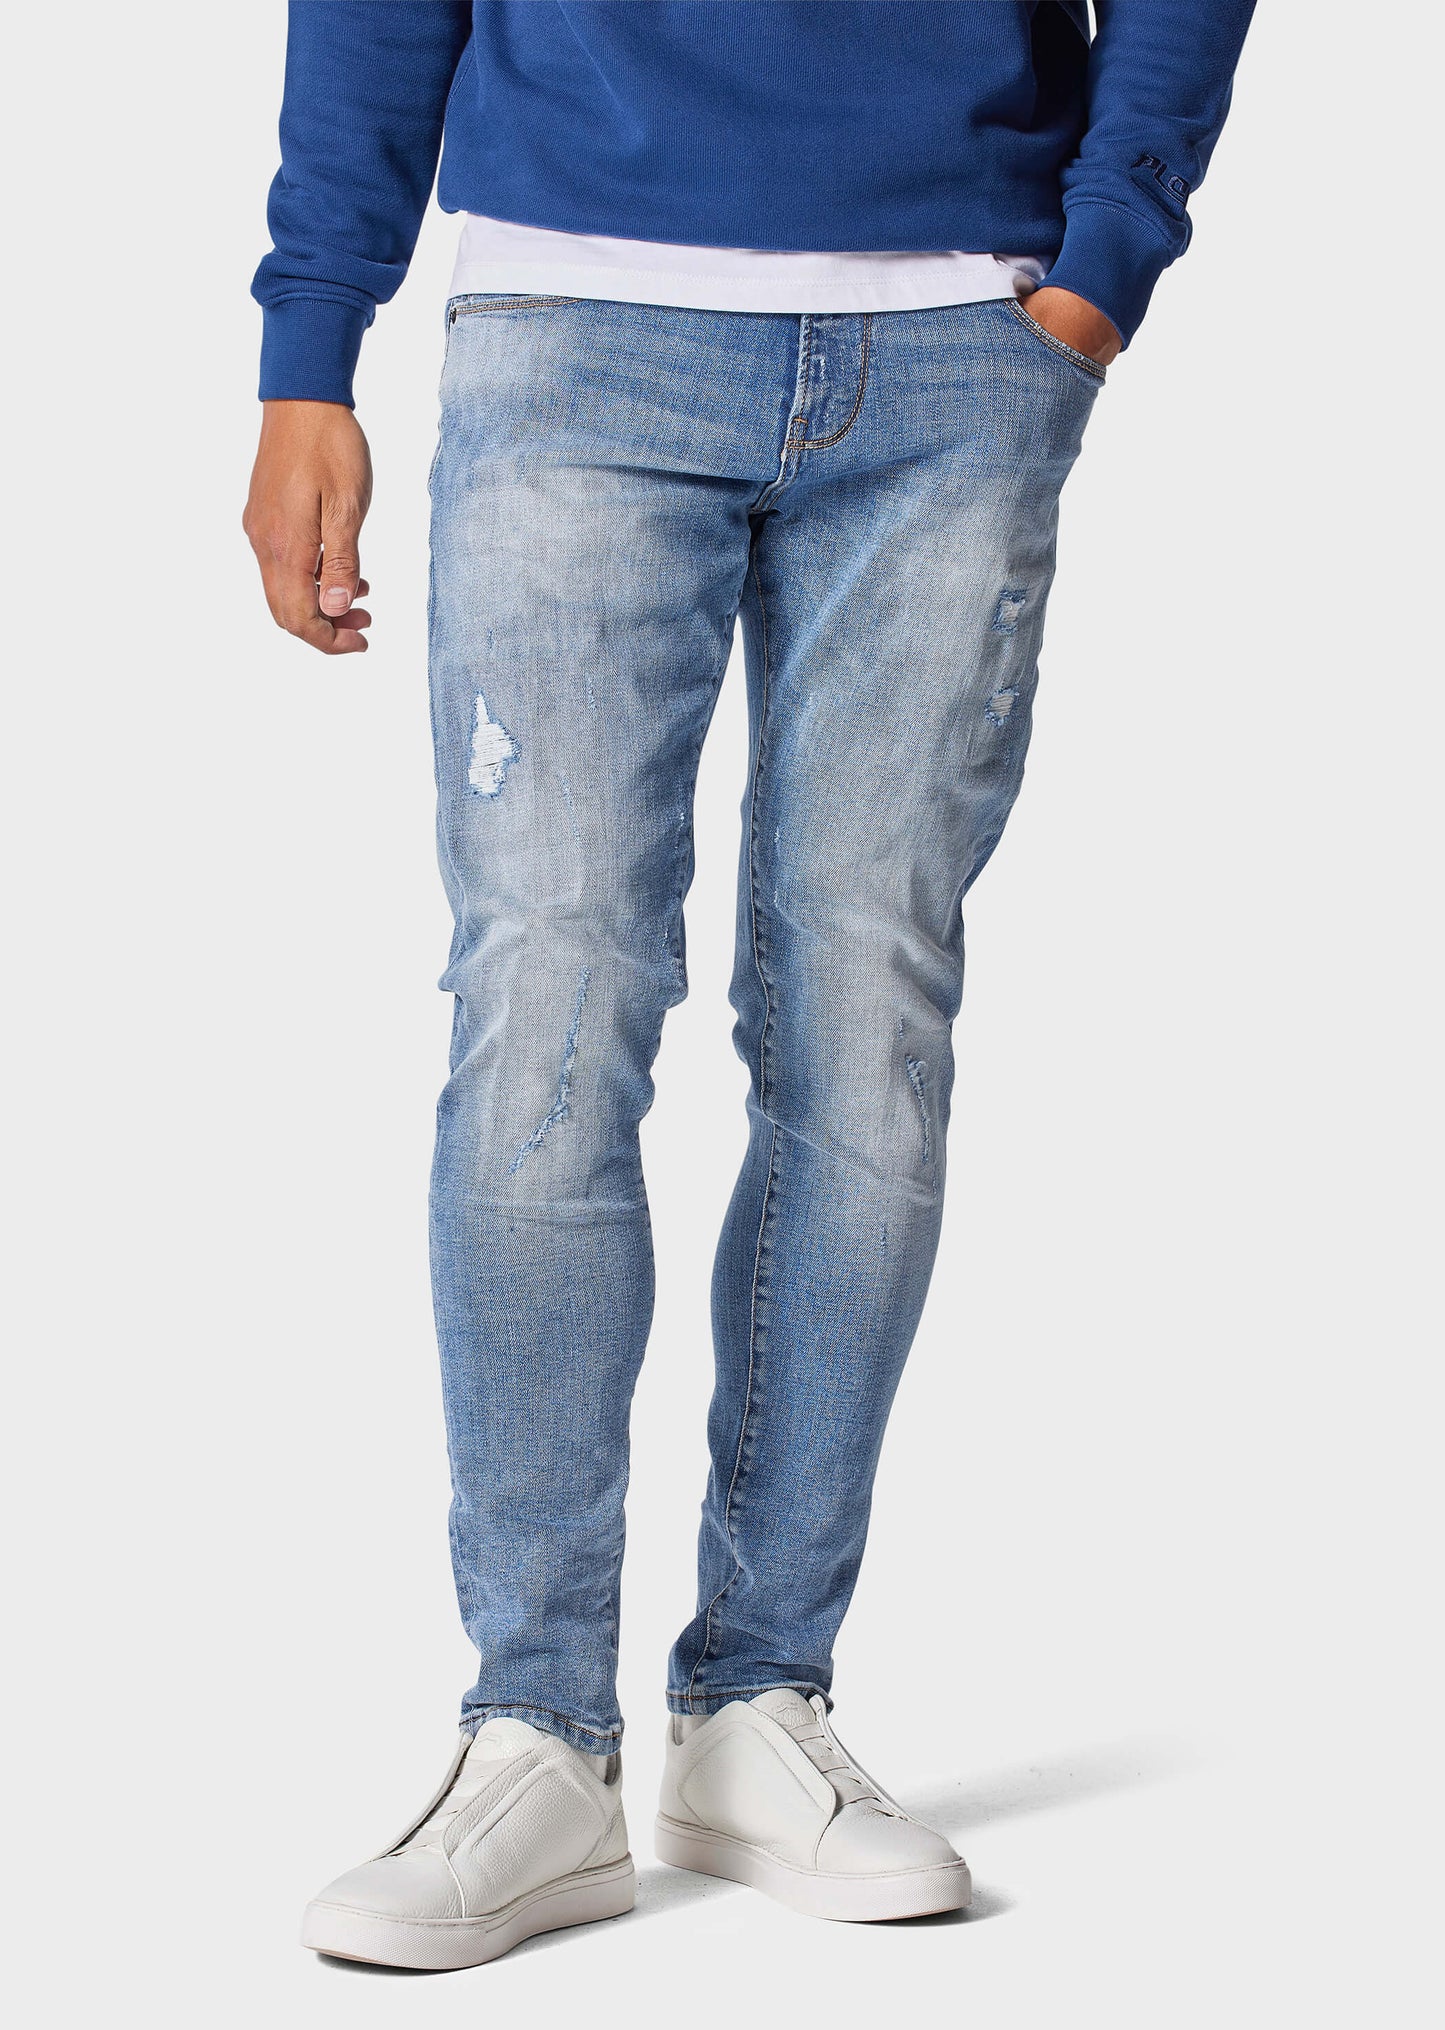 Moriarty COB 870 Slim Fit Jeans